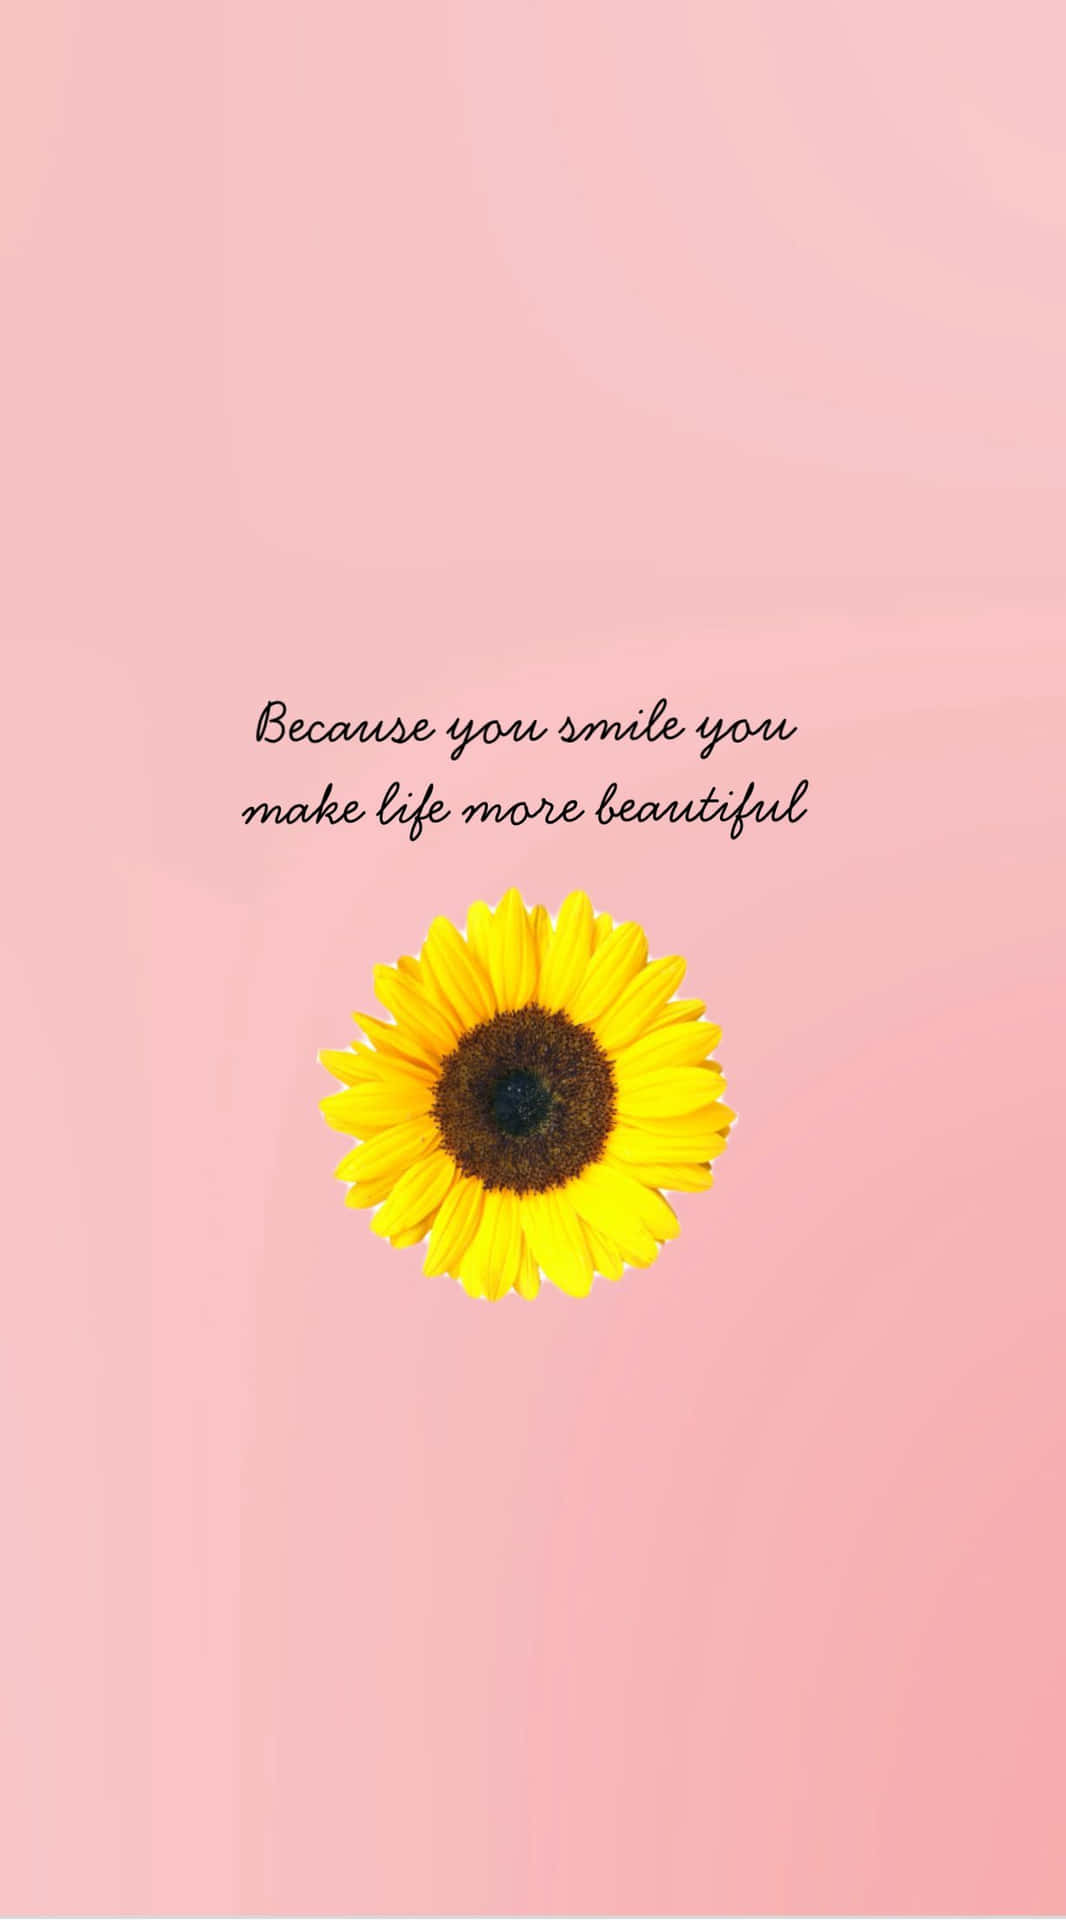 Download Aesthetic Peach Sunflower Quotes Wallpaper